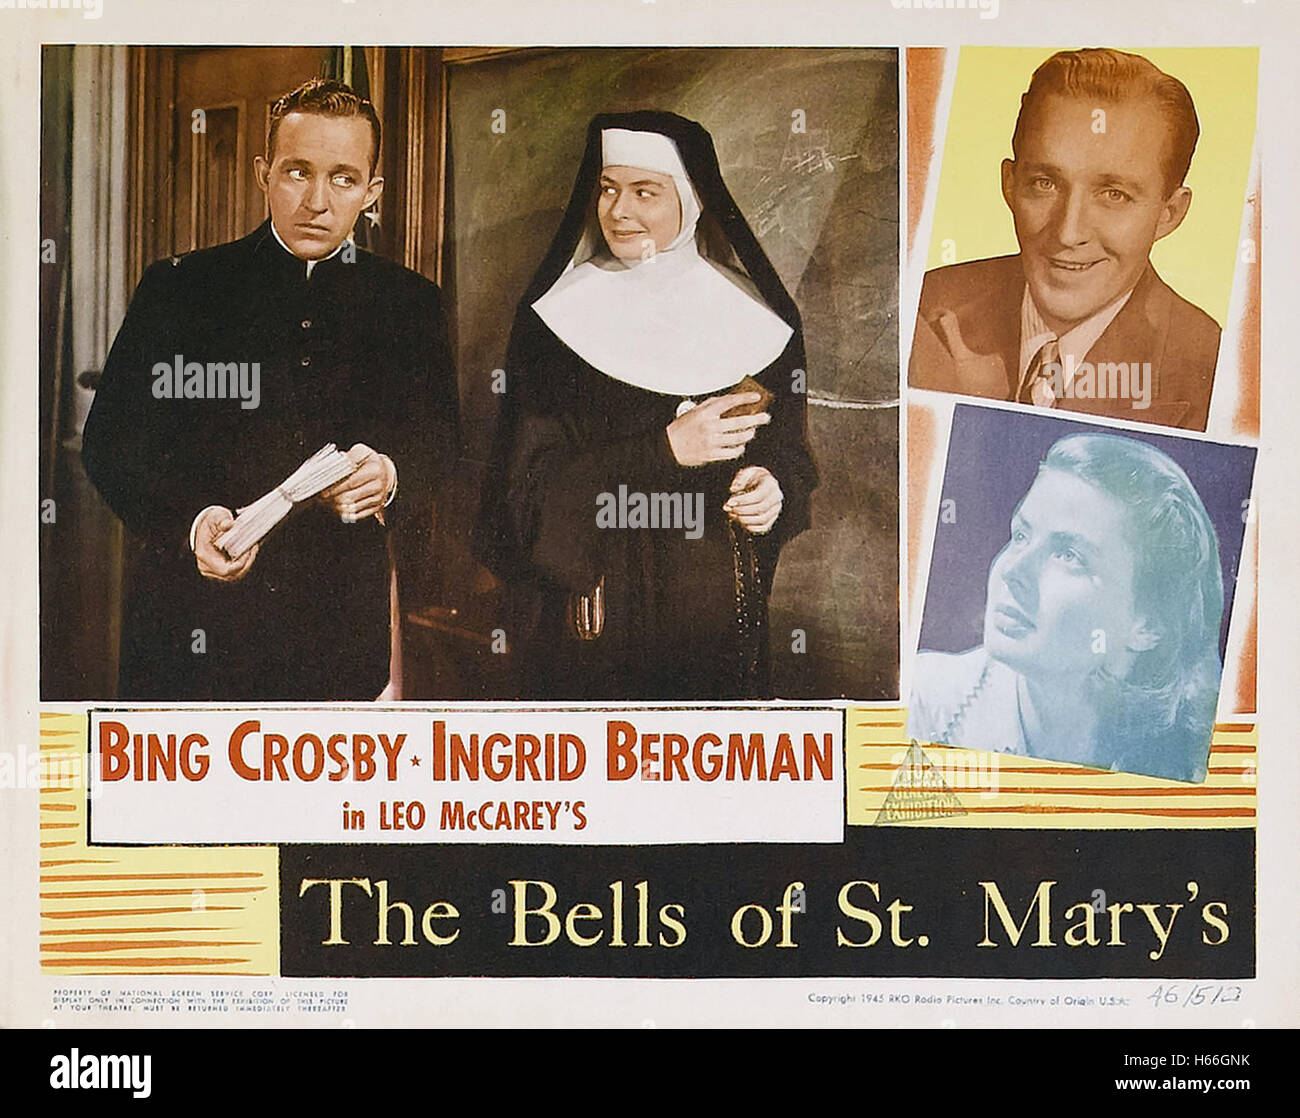 The Bells of St. Mary's - Movie Poster - Stock Photo